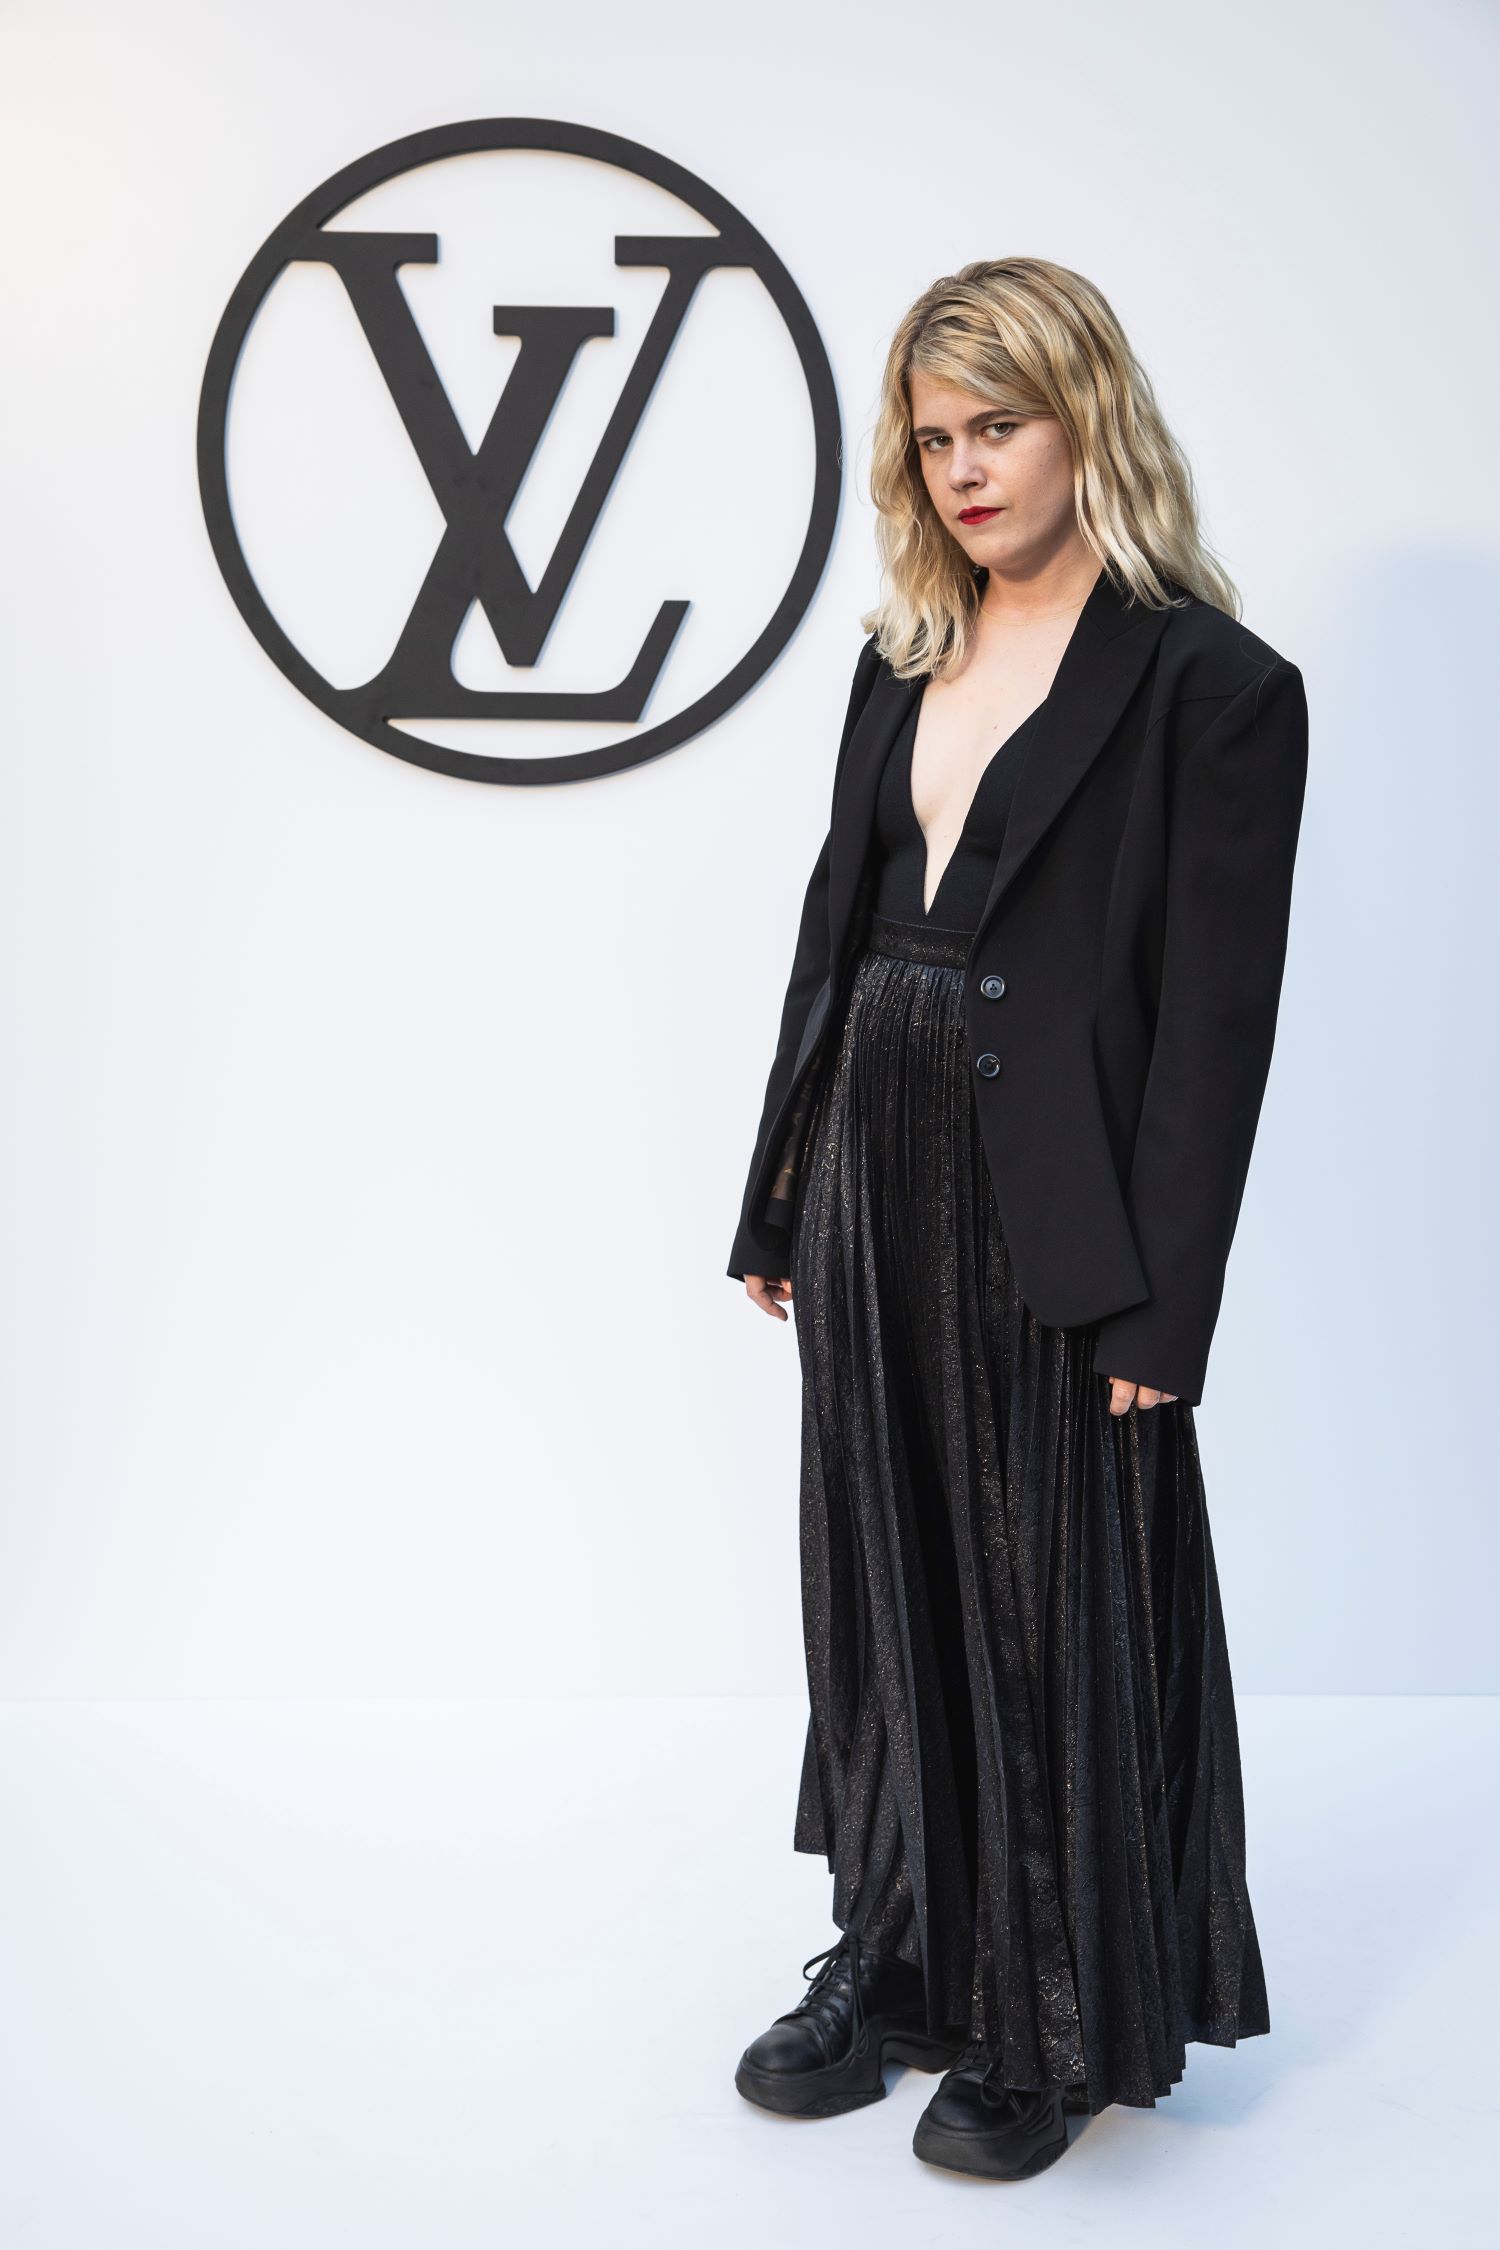 Zaho de Sagazan attending the Cruise 2025 Fashion Show by Louis Vuitton in Barcelona | CRUISE 2025 FASHION SHOW COLLECTION © Louis Vuitton – All rights reserved | Courtesy of Gnazzo Group.